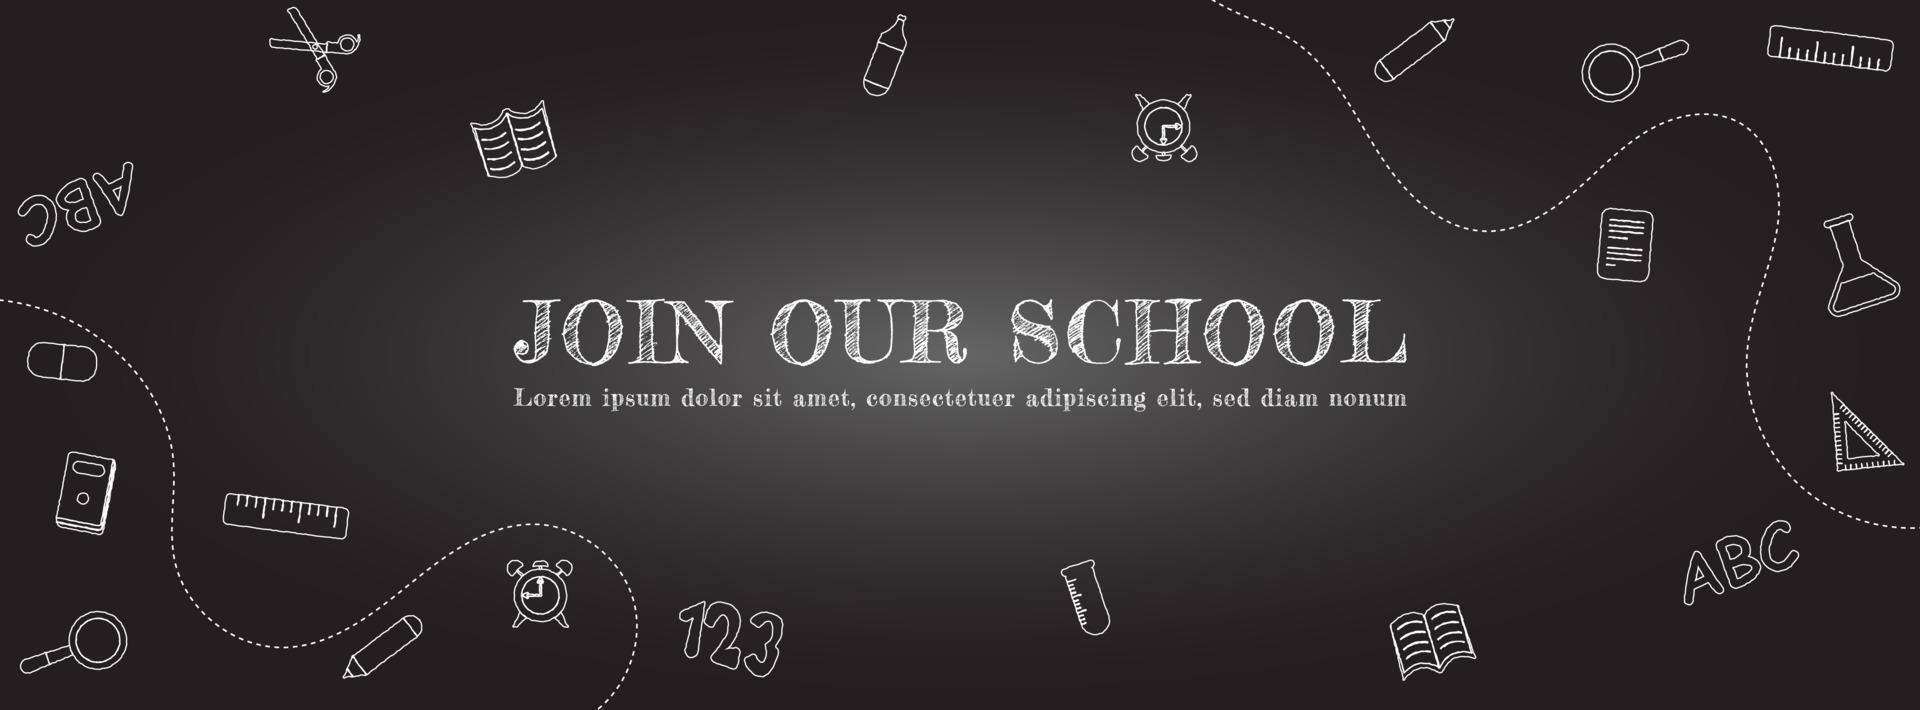 handrawn back to school banner template with chalkboard vector